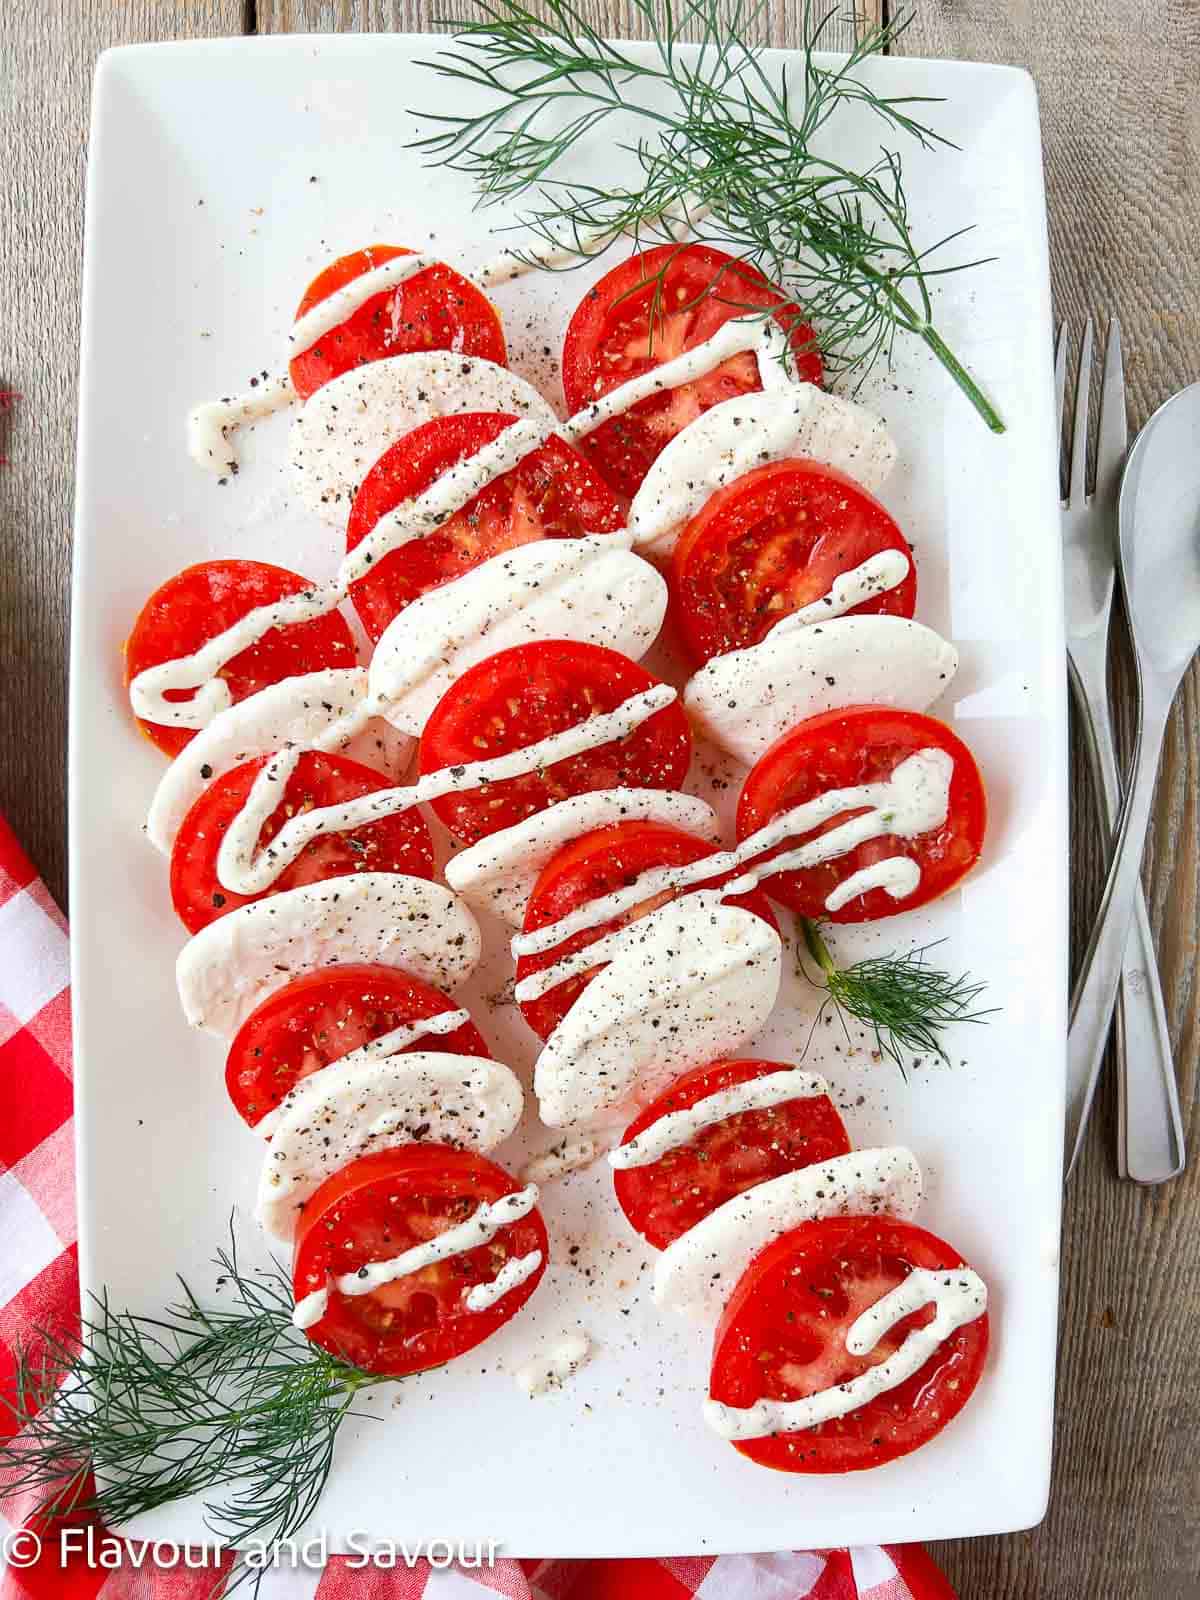 A rectangular platter with Dill Caprese Salad and sprigs of fresh dill.